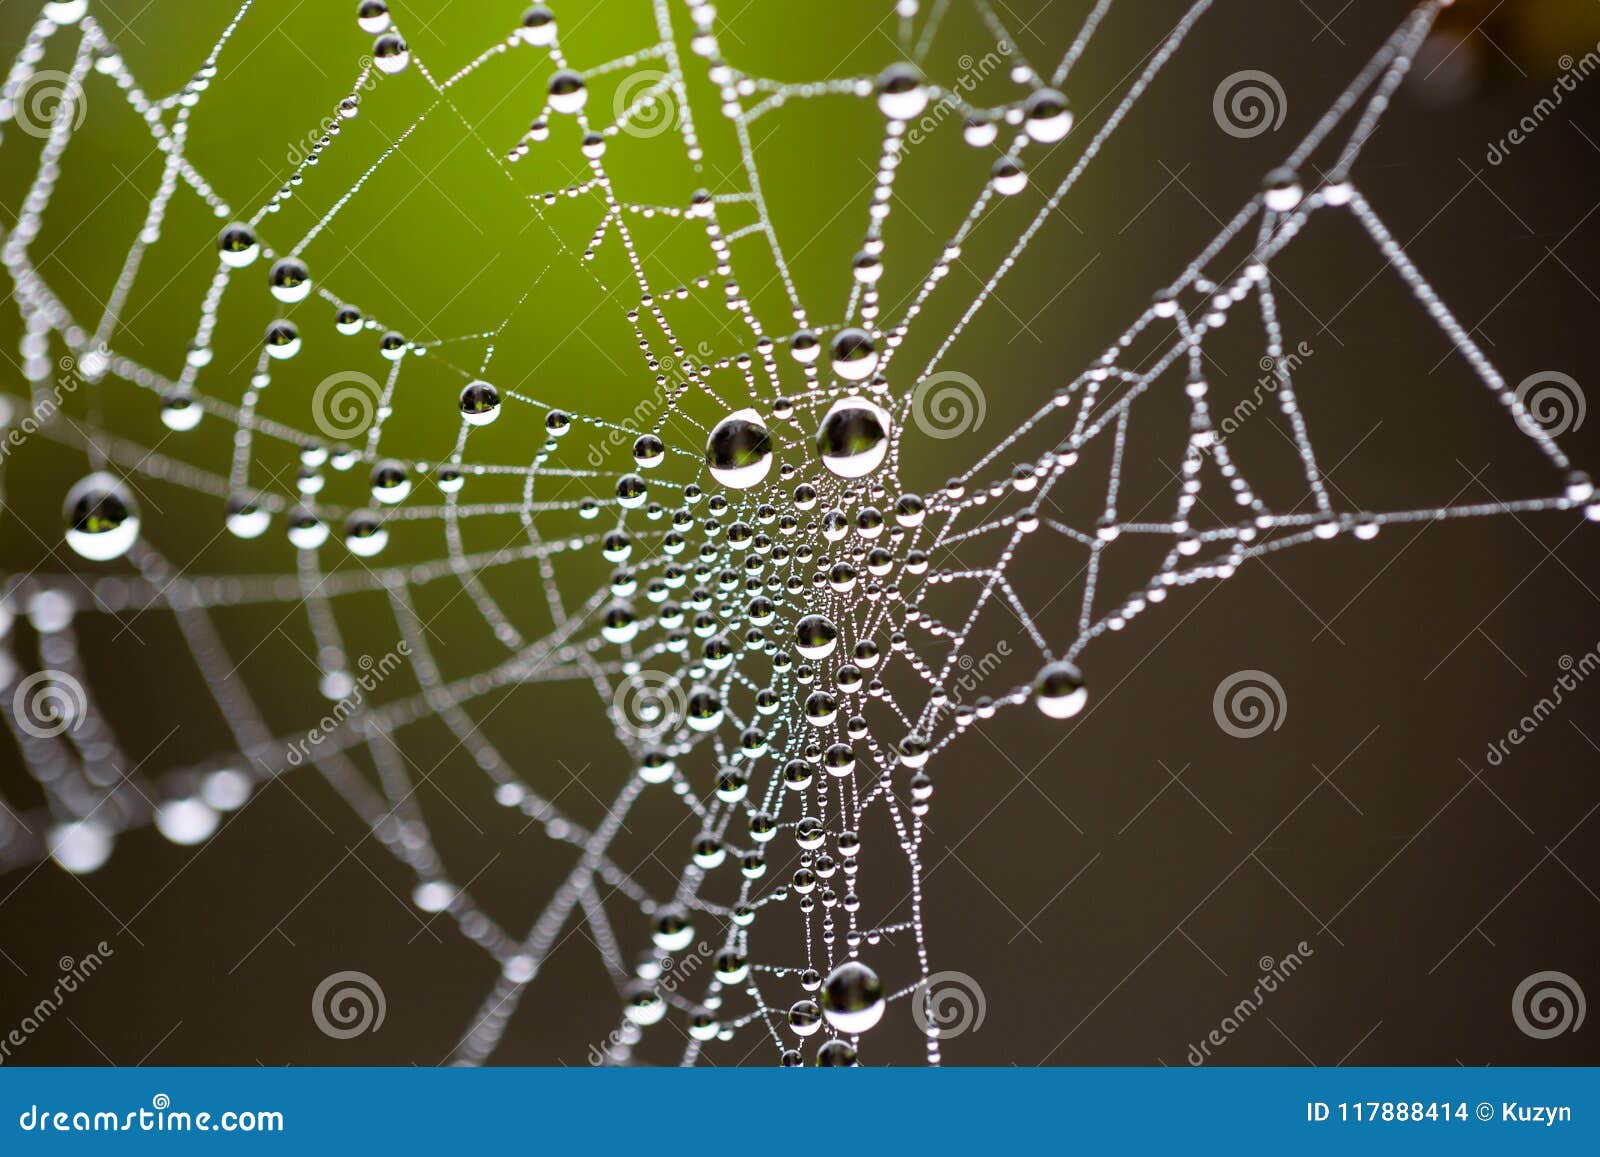 Water Drops on Spider Web Extreme Macro Crop Photo - macro, nature: 117888414